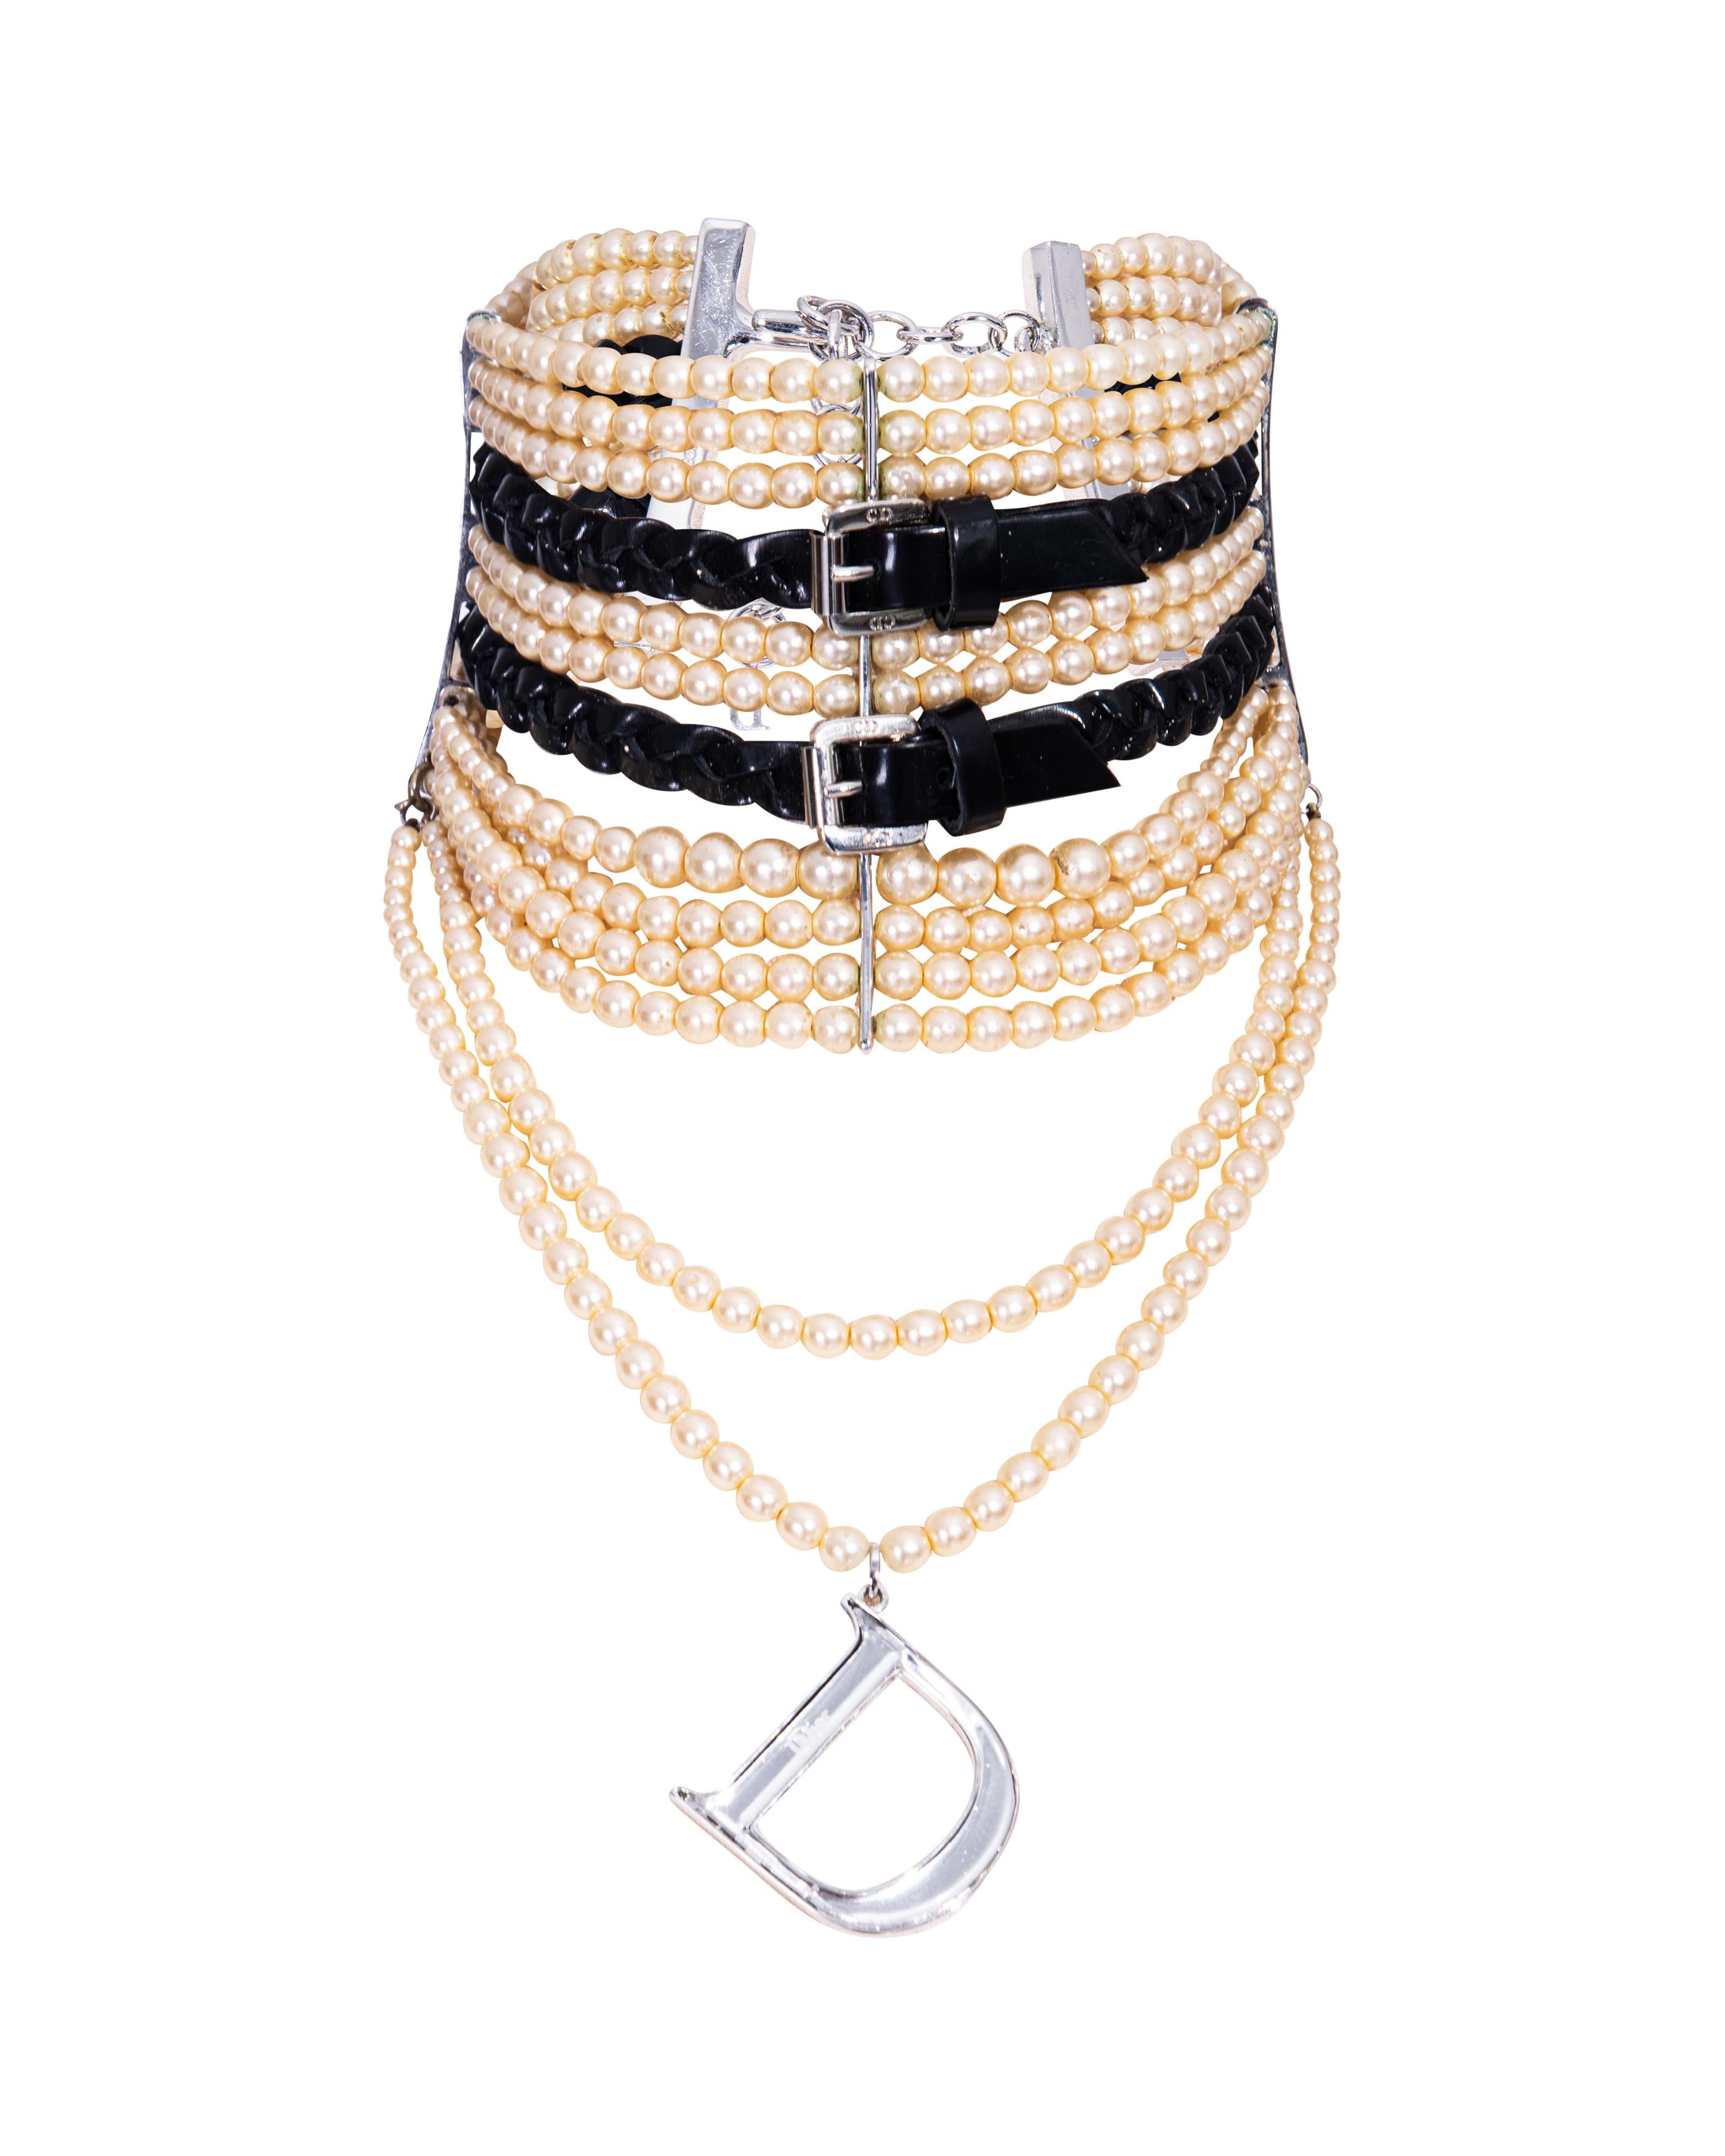 S/S 2004 Christian Dior by John Galliano Pearl and Black Leather Choker Necklace 2